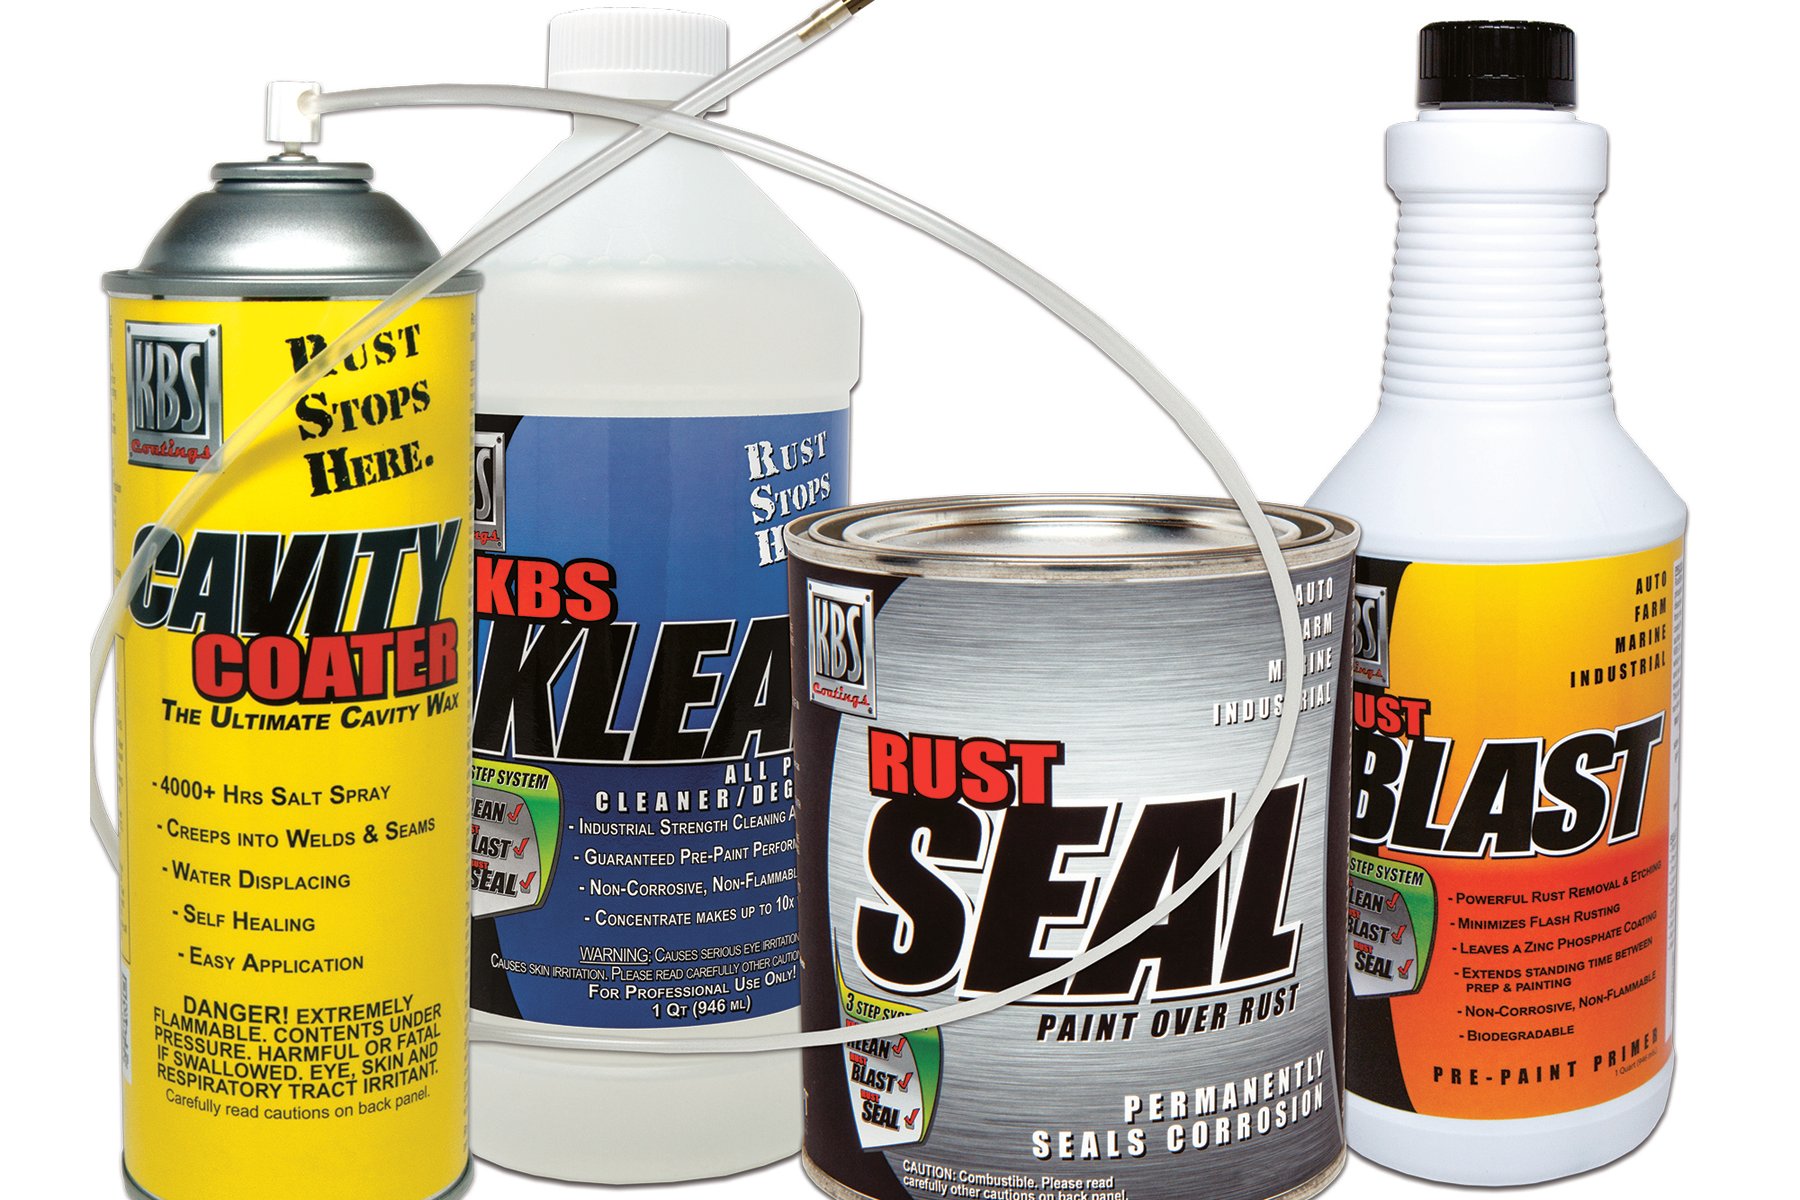 Rust Protection And Paint In One Kit From KBS Coatings